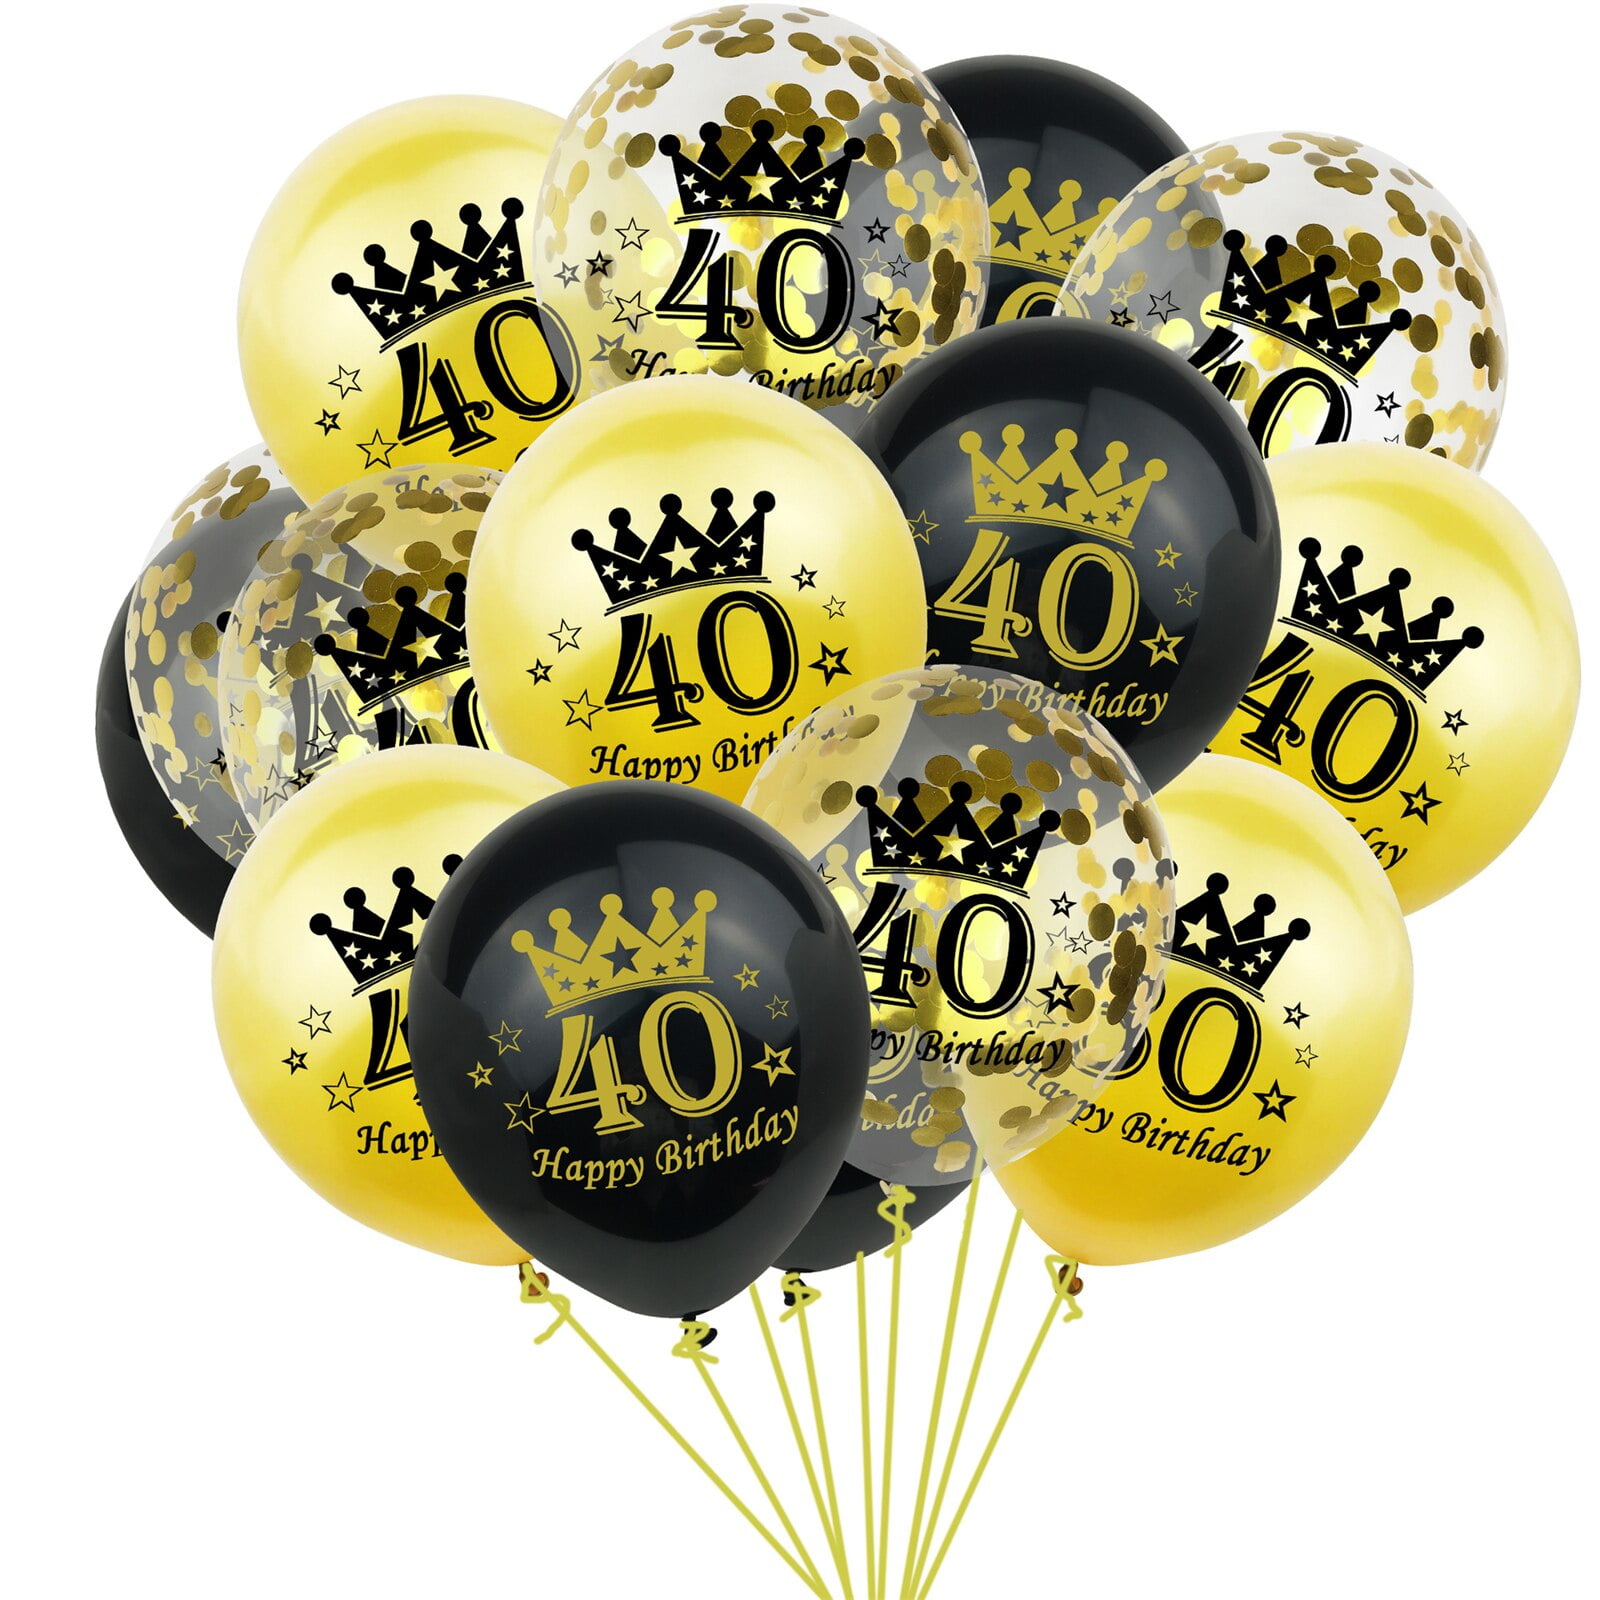 Dropship Black Gold Happy Birthday Party Confetti Balloon 30th 40th 50th Birthday  Party Decorations Adult Party Ballon Air Globos to Sell Online at a Lower  Price